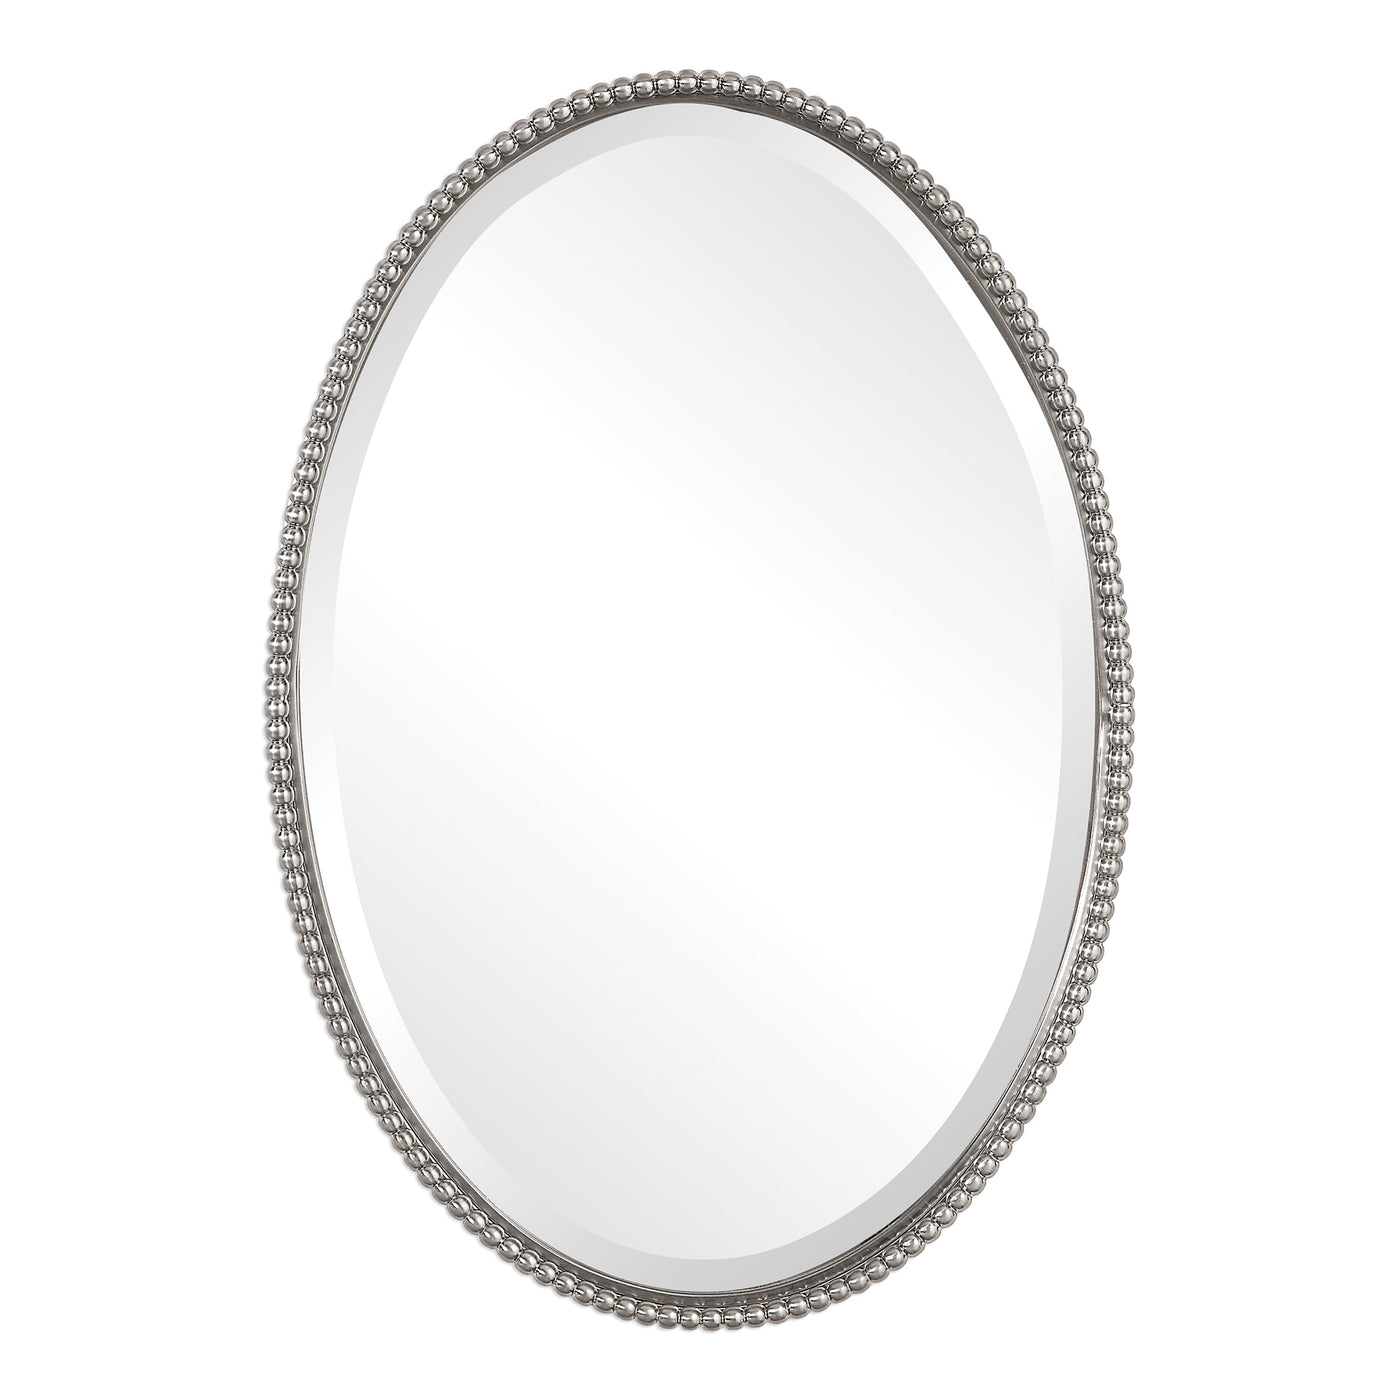 This Oval Mirror Features A Frame Made Of Hand Forged Metal With A Brushed Nickel Finish. Mirror Is Beveled And May Be Hun...